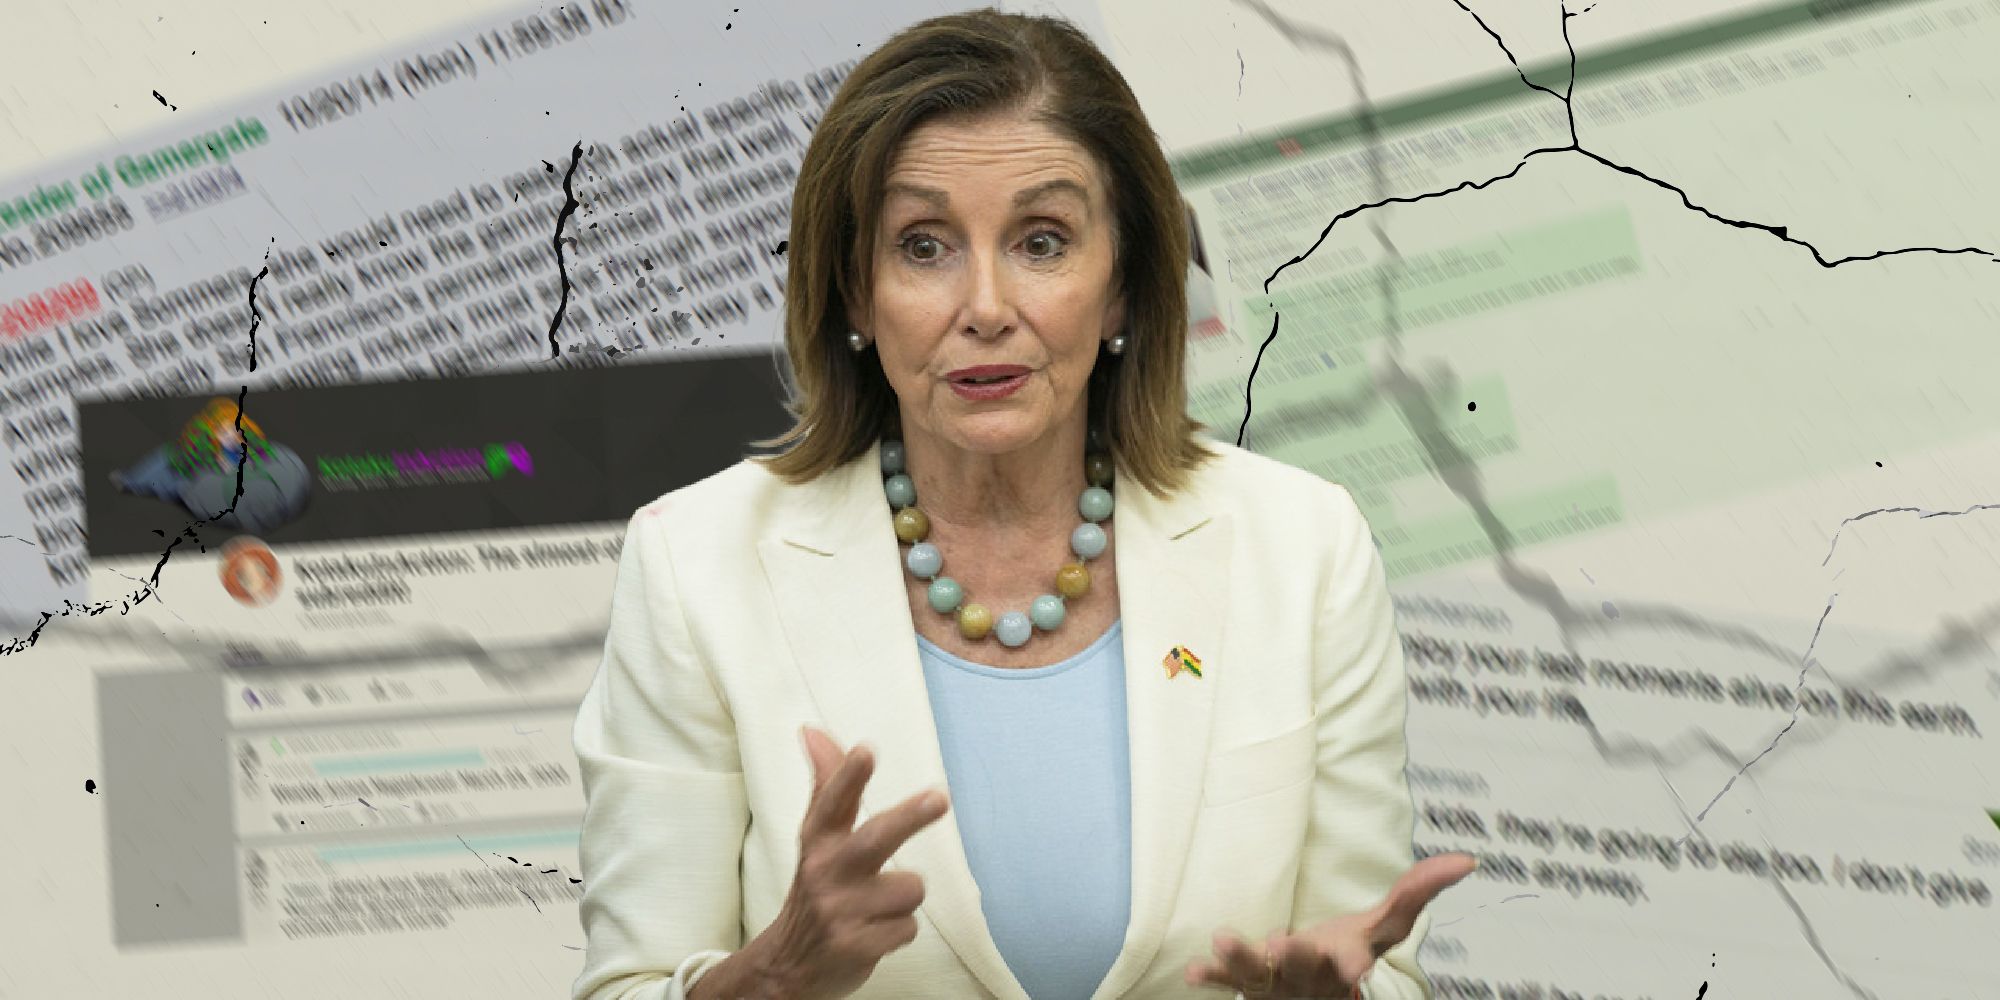 Nancy Pelosi surrounded by forum posts about Gamergate